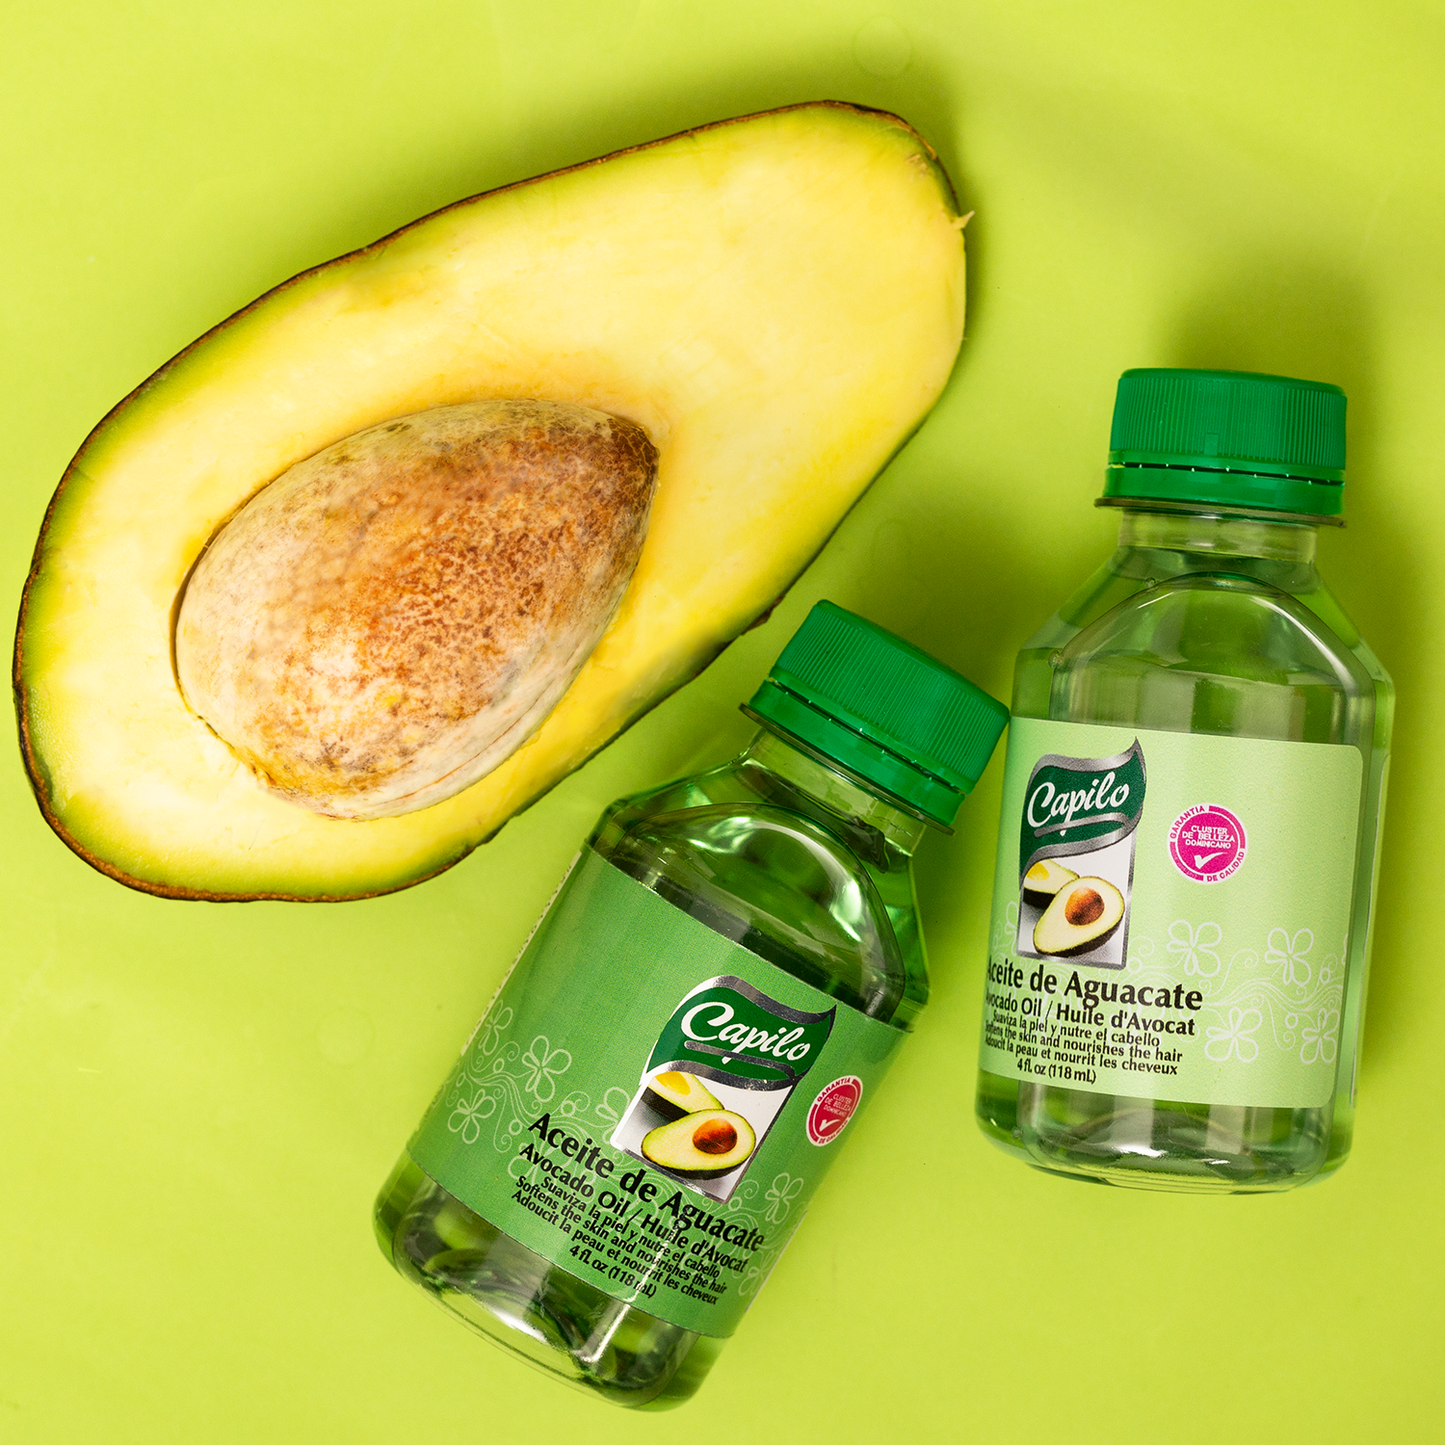 Capilo Avocado Oil 4 oz. | Nourish and Softens Hair | Mineral Oil + Avocado Oil | Parabens and Sulfate Free